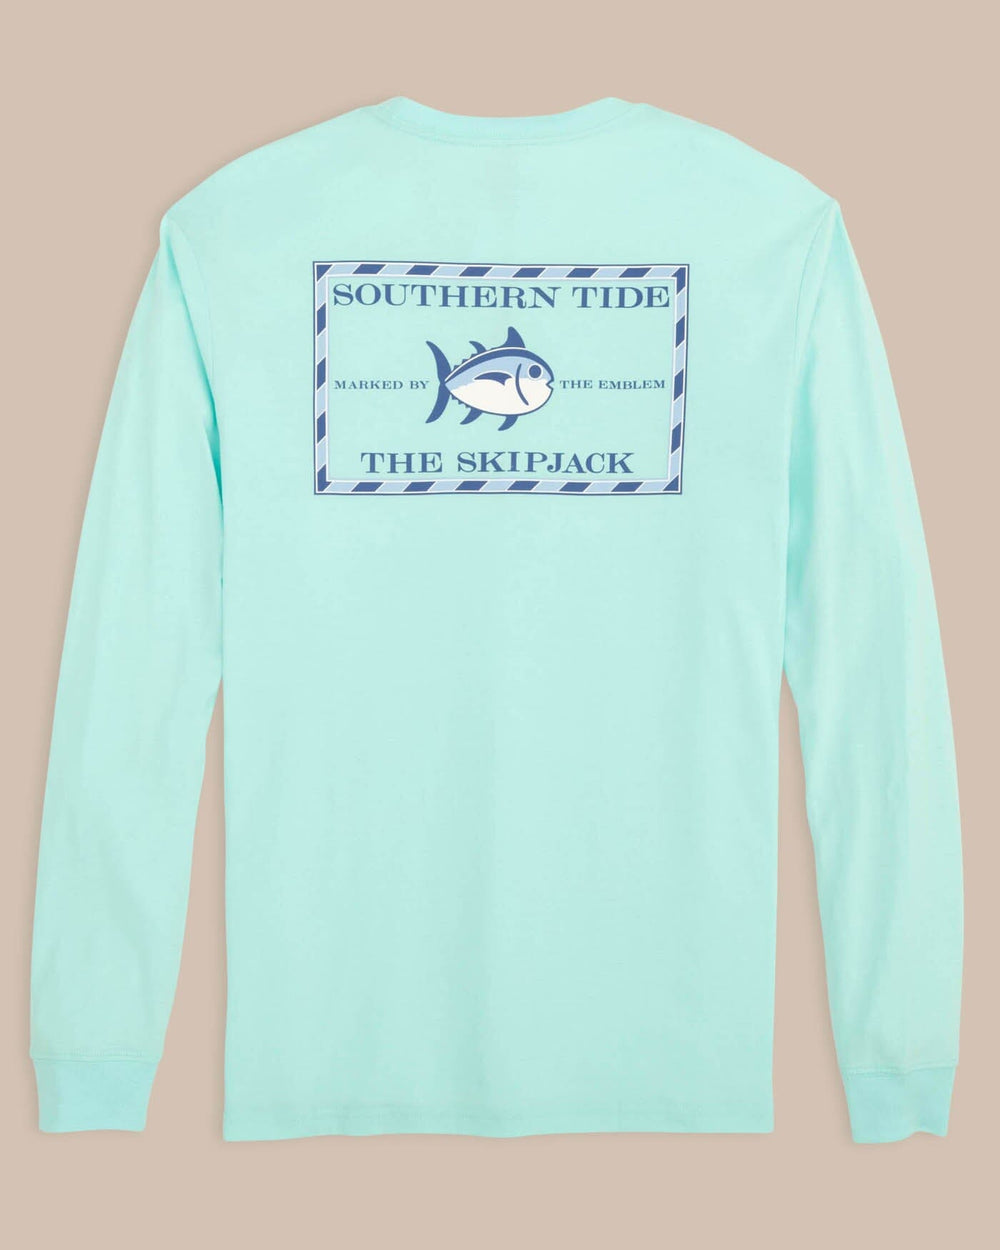 The back view of the Southern Tide Long Sleeve Original Skipjack T-Shirt by Southern Tide - Baltic Teal